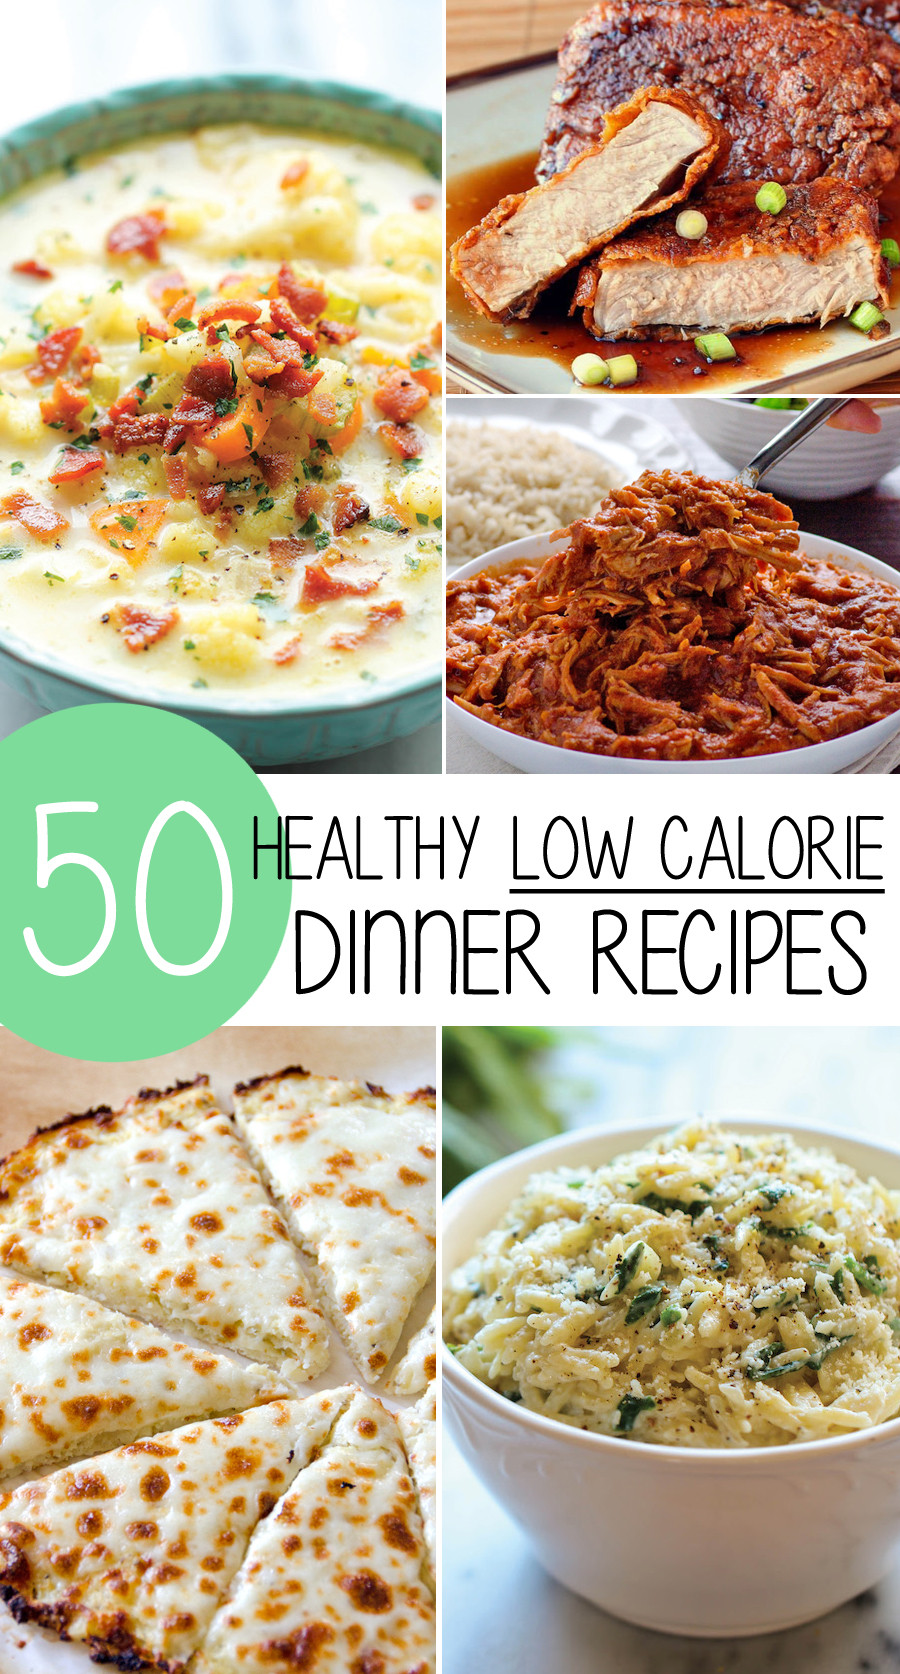 Healthy Low Calorie Dinners
 50 Healthy Low Calorie Weight Loss Dinner Recipes